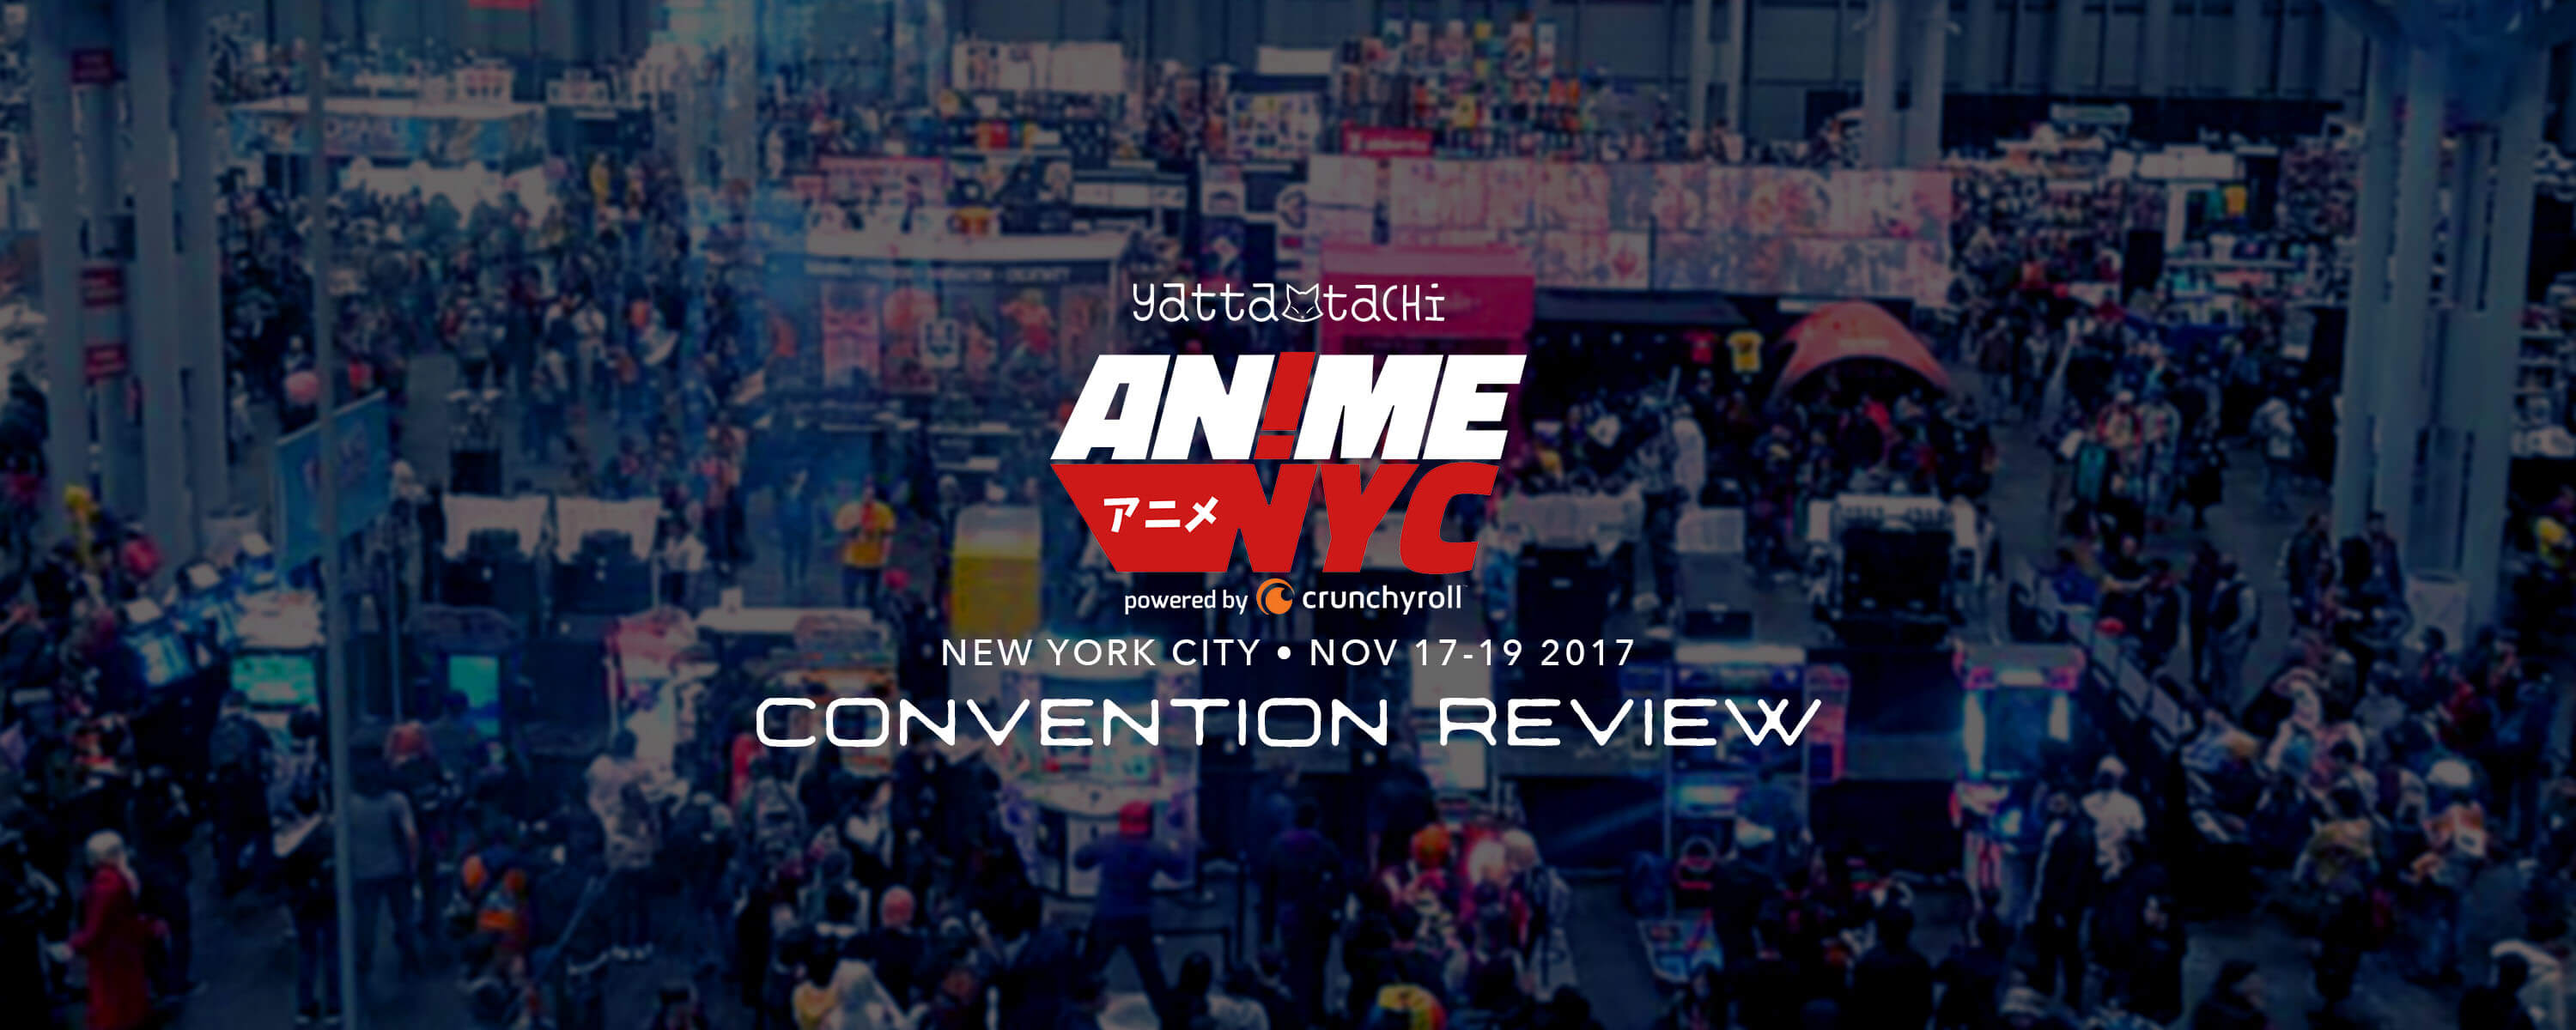 Aggregate 65+ anime nyc tickets 2022 - in.cdgdbentre